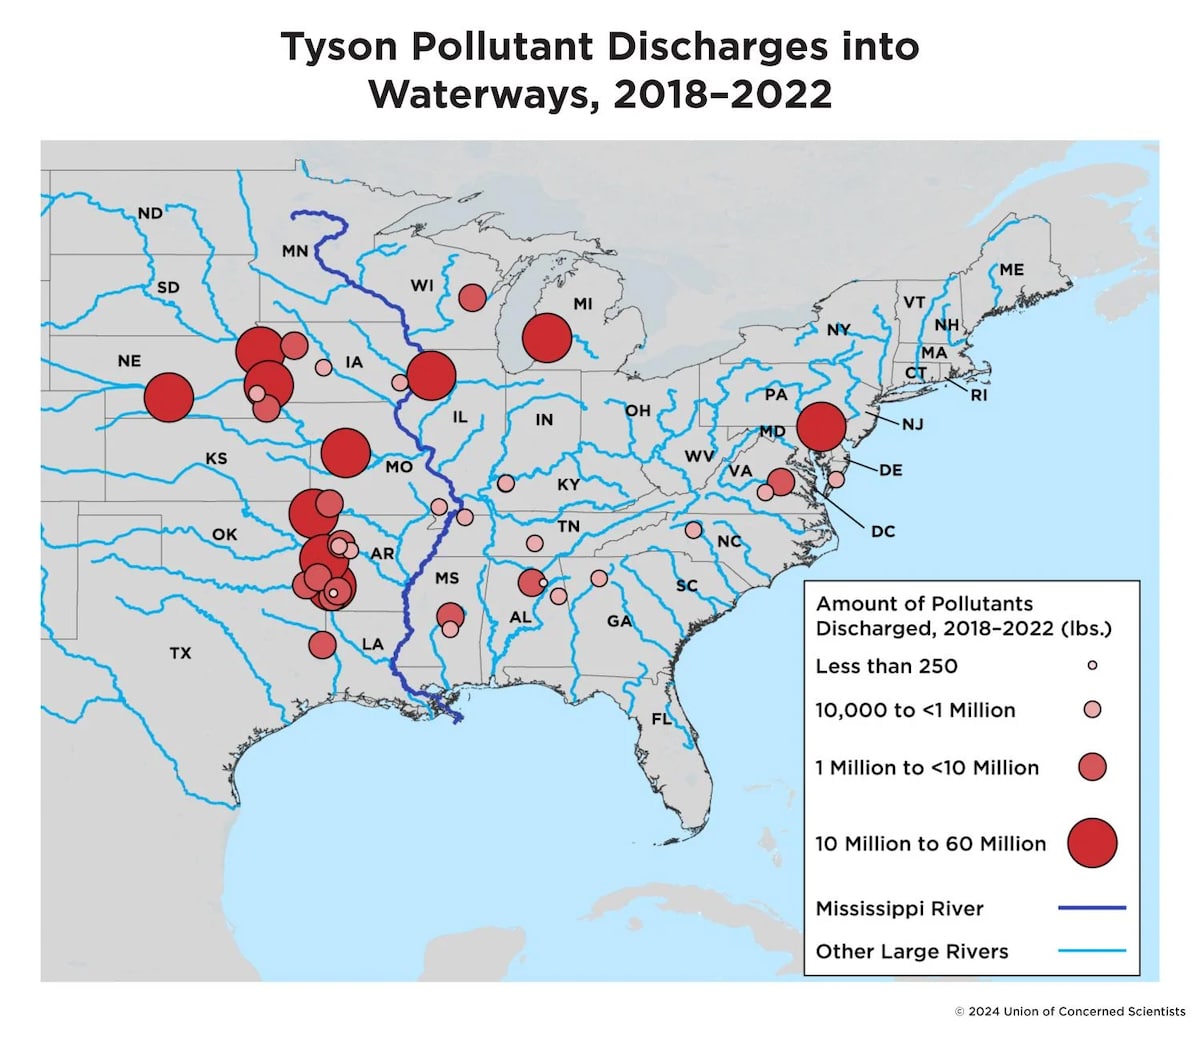 Tyson Foods Dumped Hundreds of Millions of Pounds of Slaughterhouse Pollutants Into U.S. Waterways, Report Finds